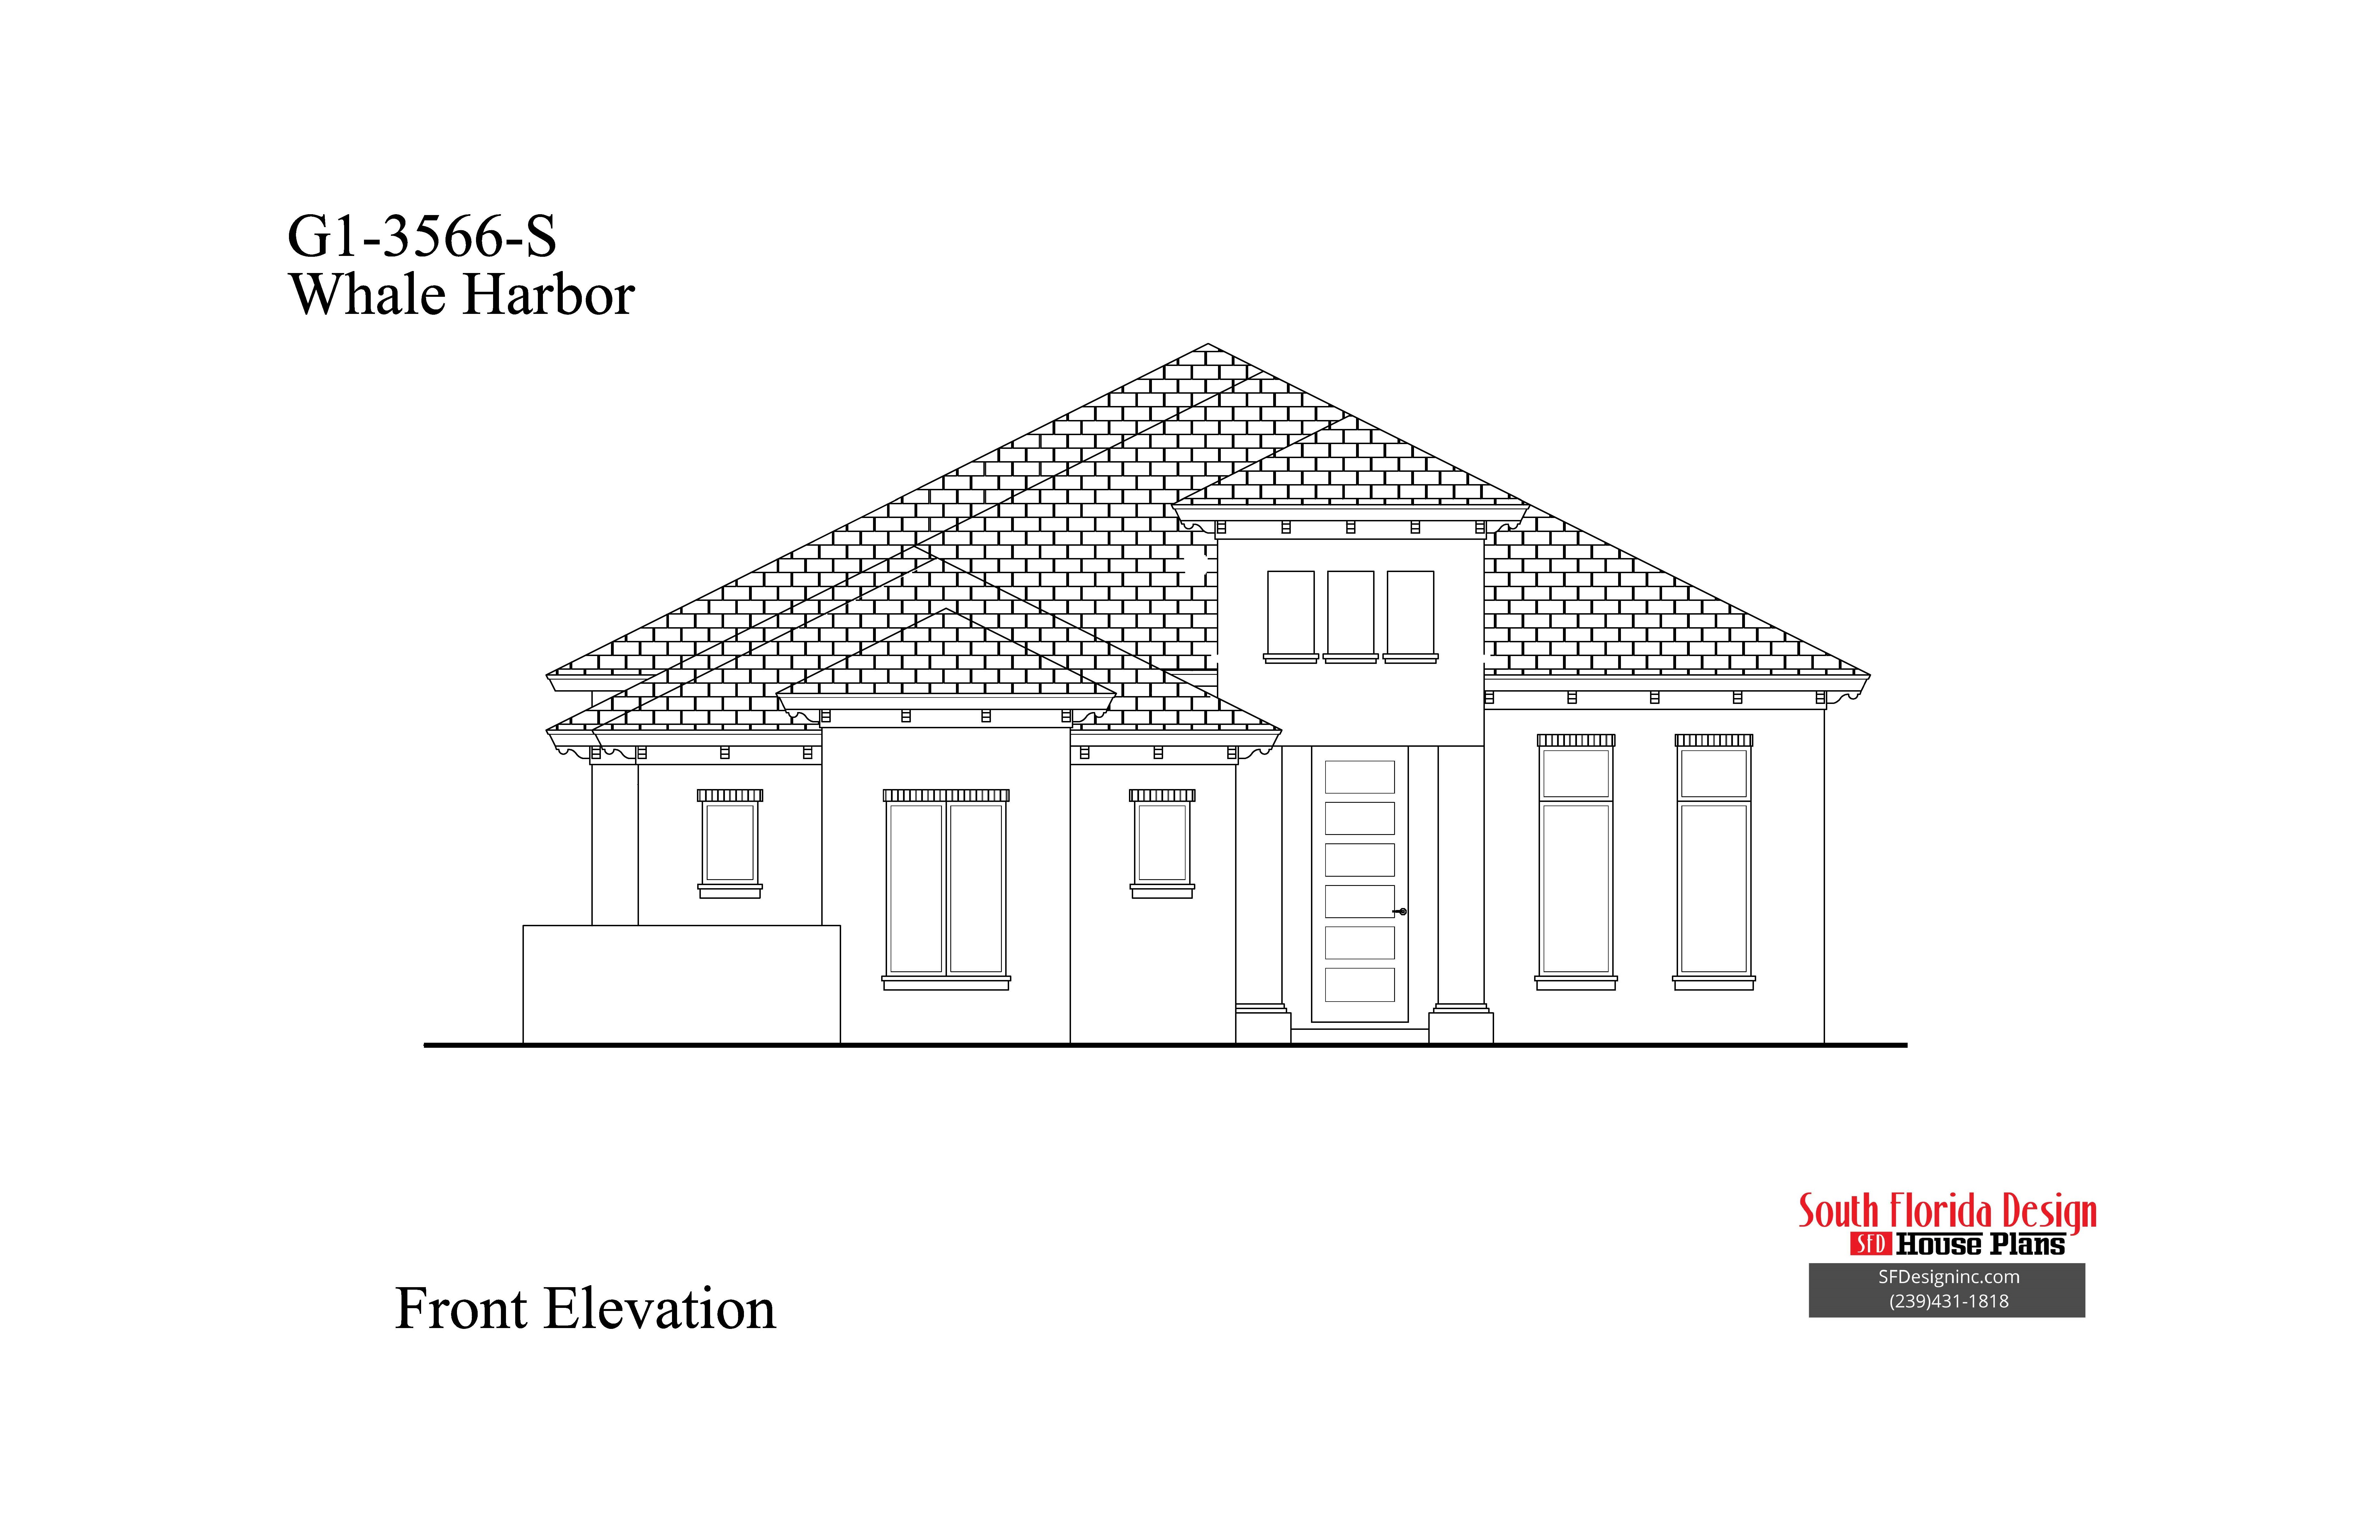 Black and white front elevation sketch of a 3566sf narrow lot house plan